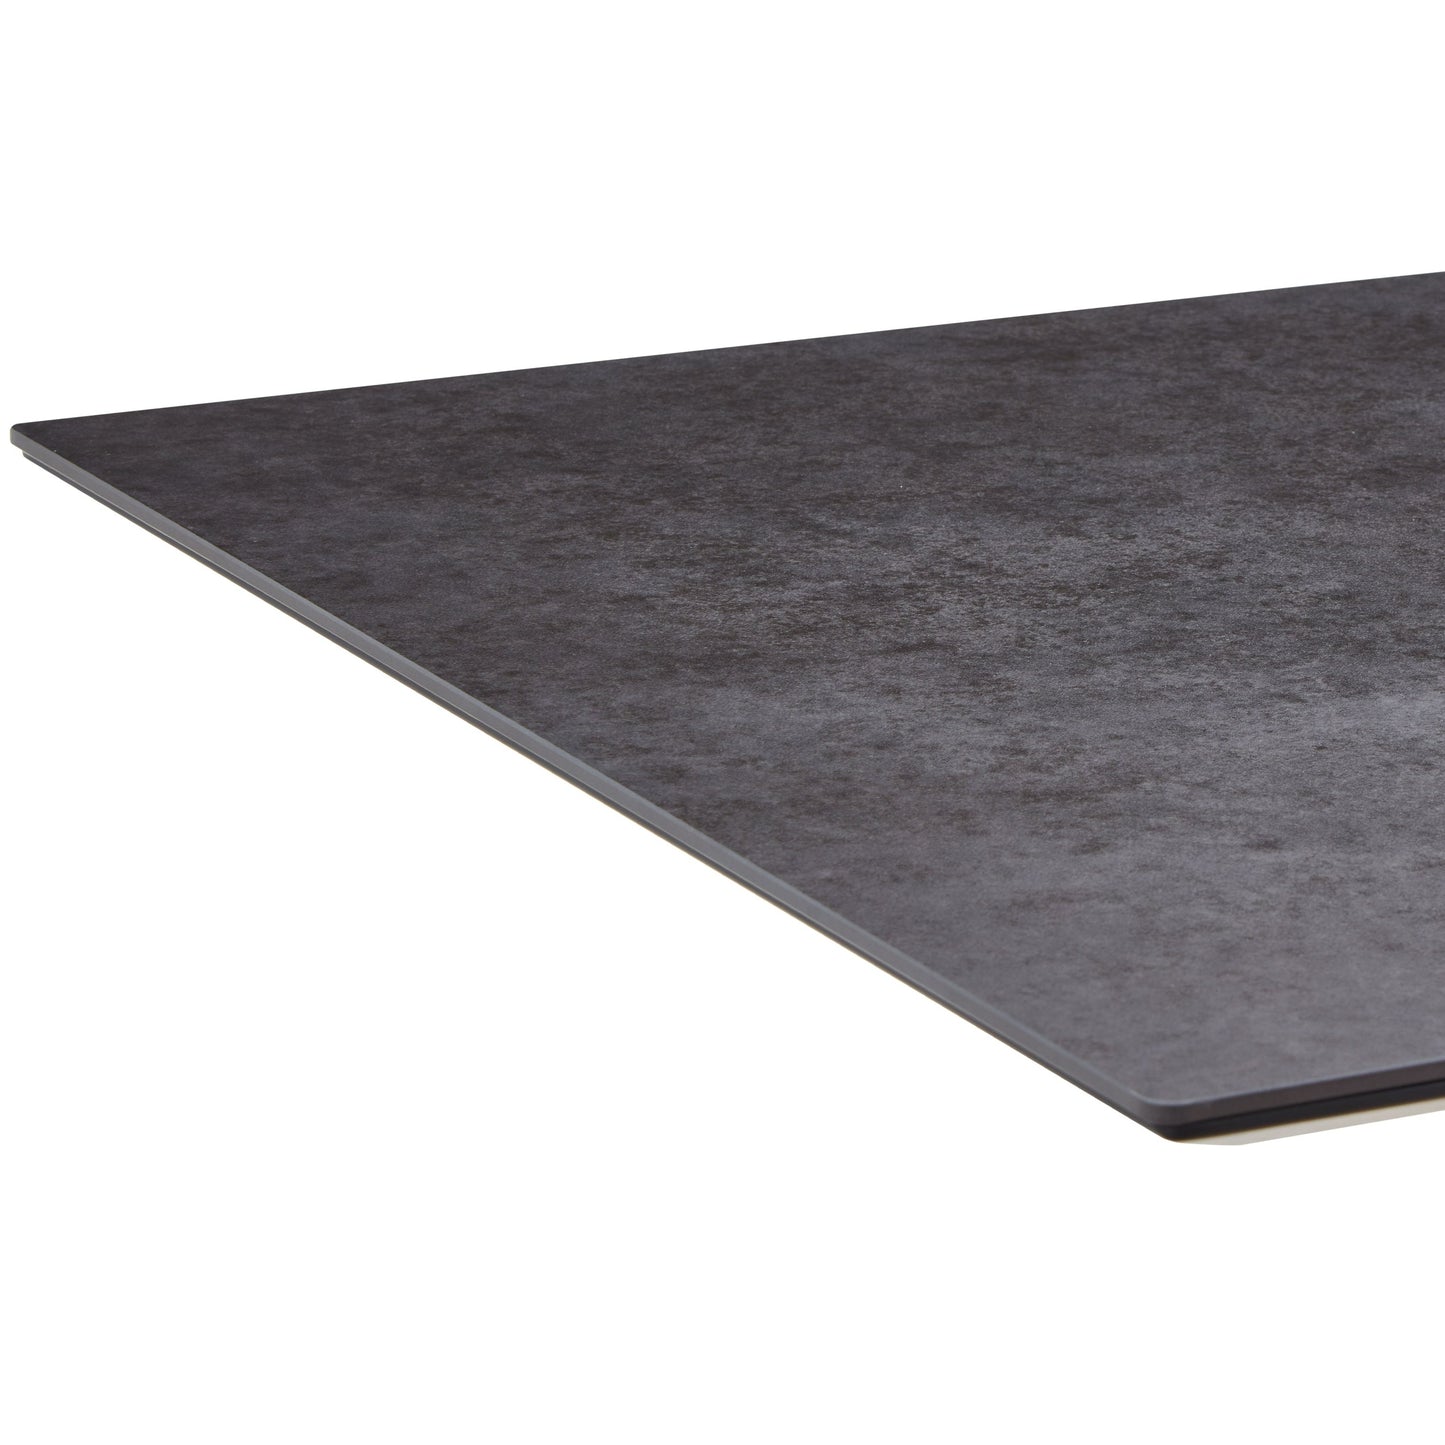 Liang & Eimil Theodore Dining Table in Dark Grey